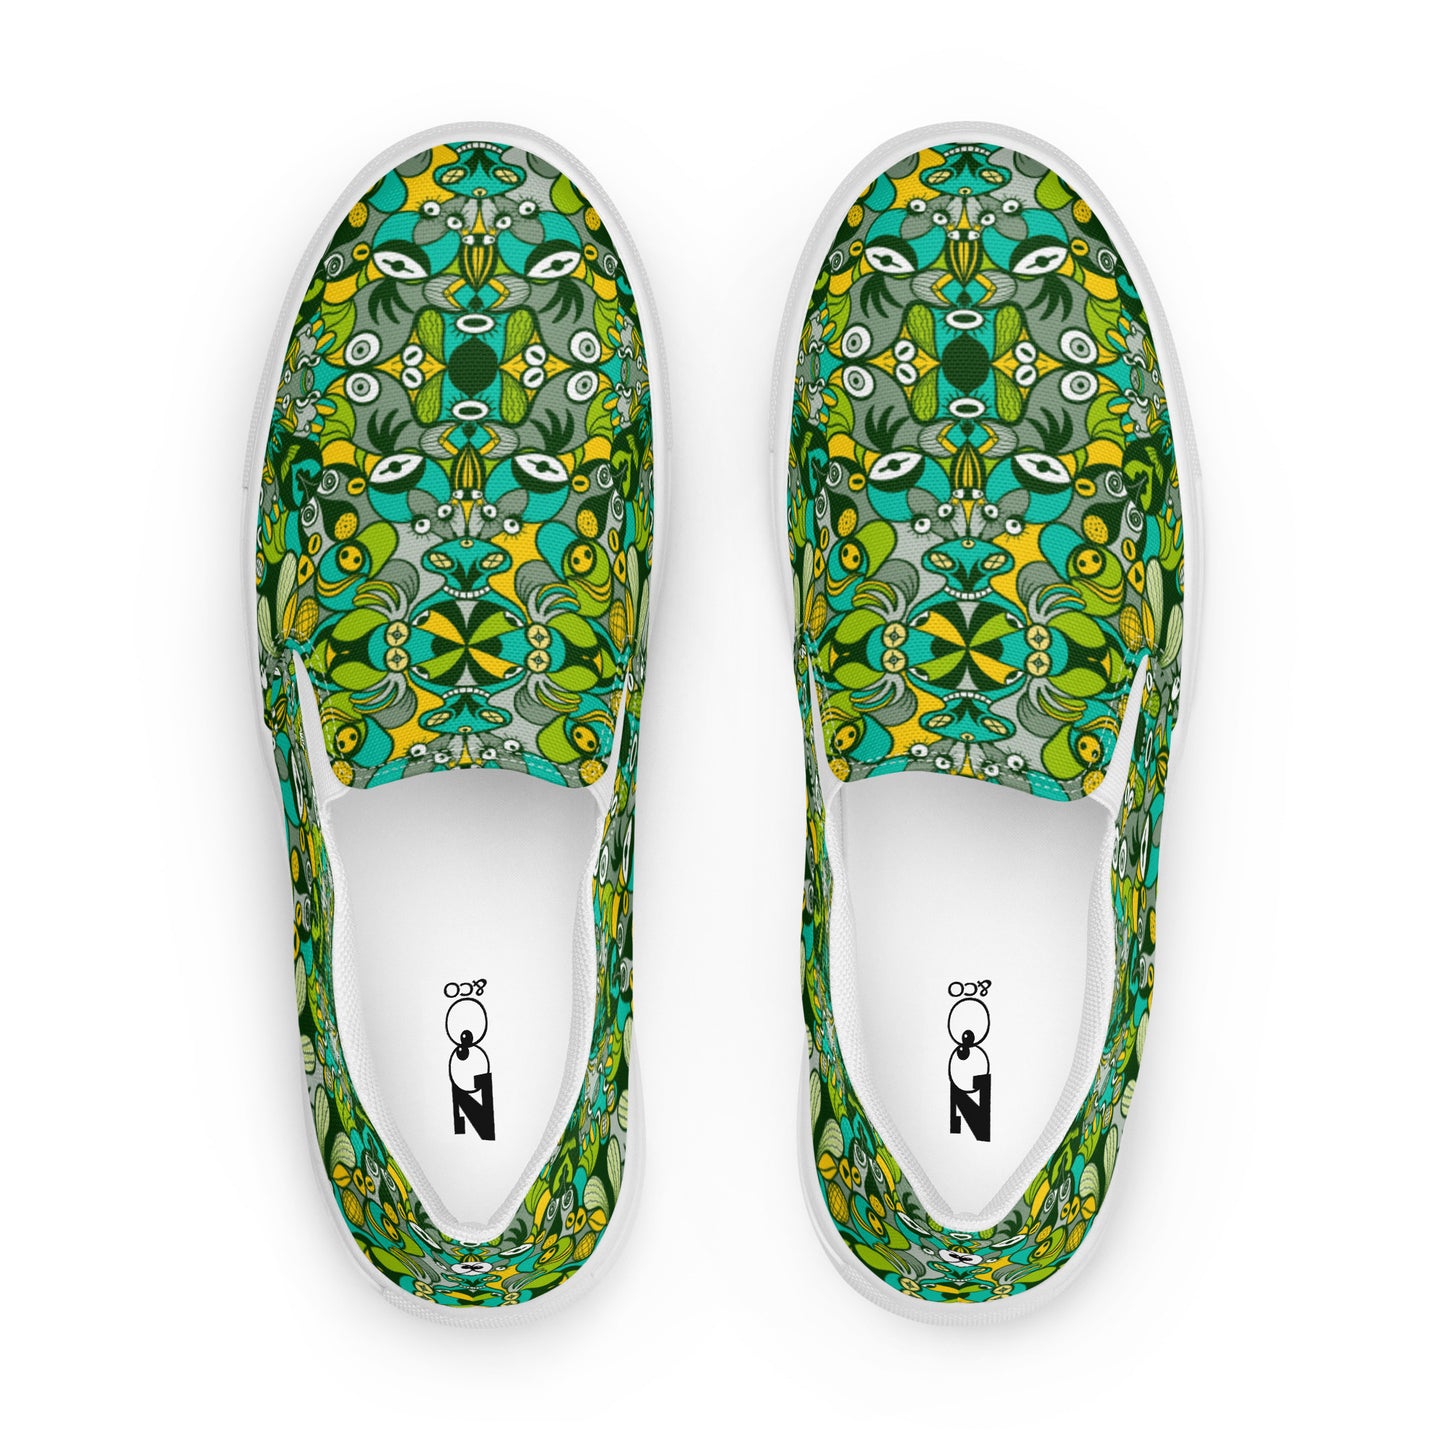 Join the funniest alien doodling network in the universe Men’s slip-on canvas shoes. Top view